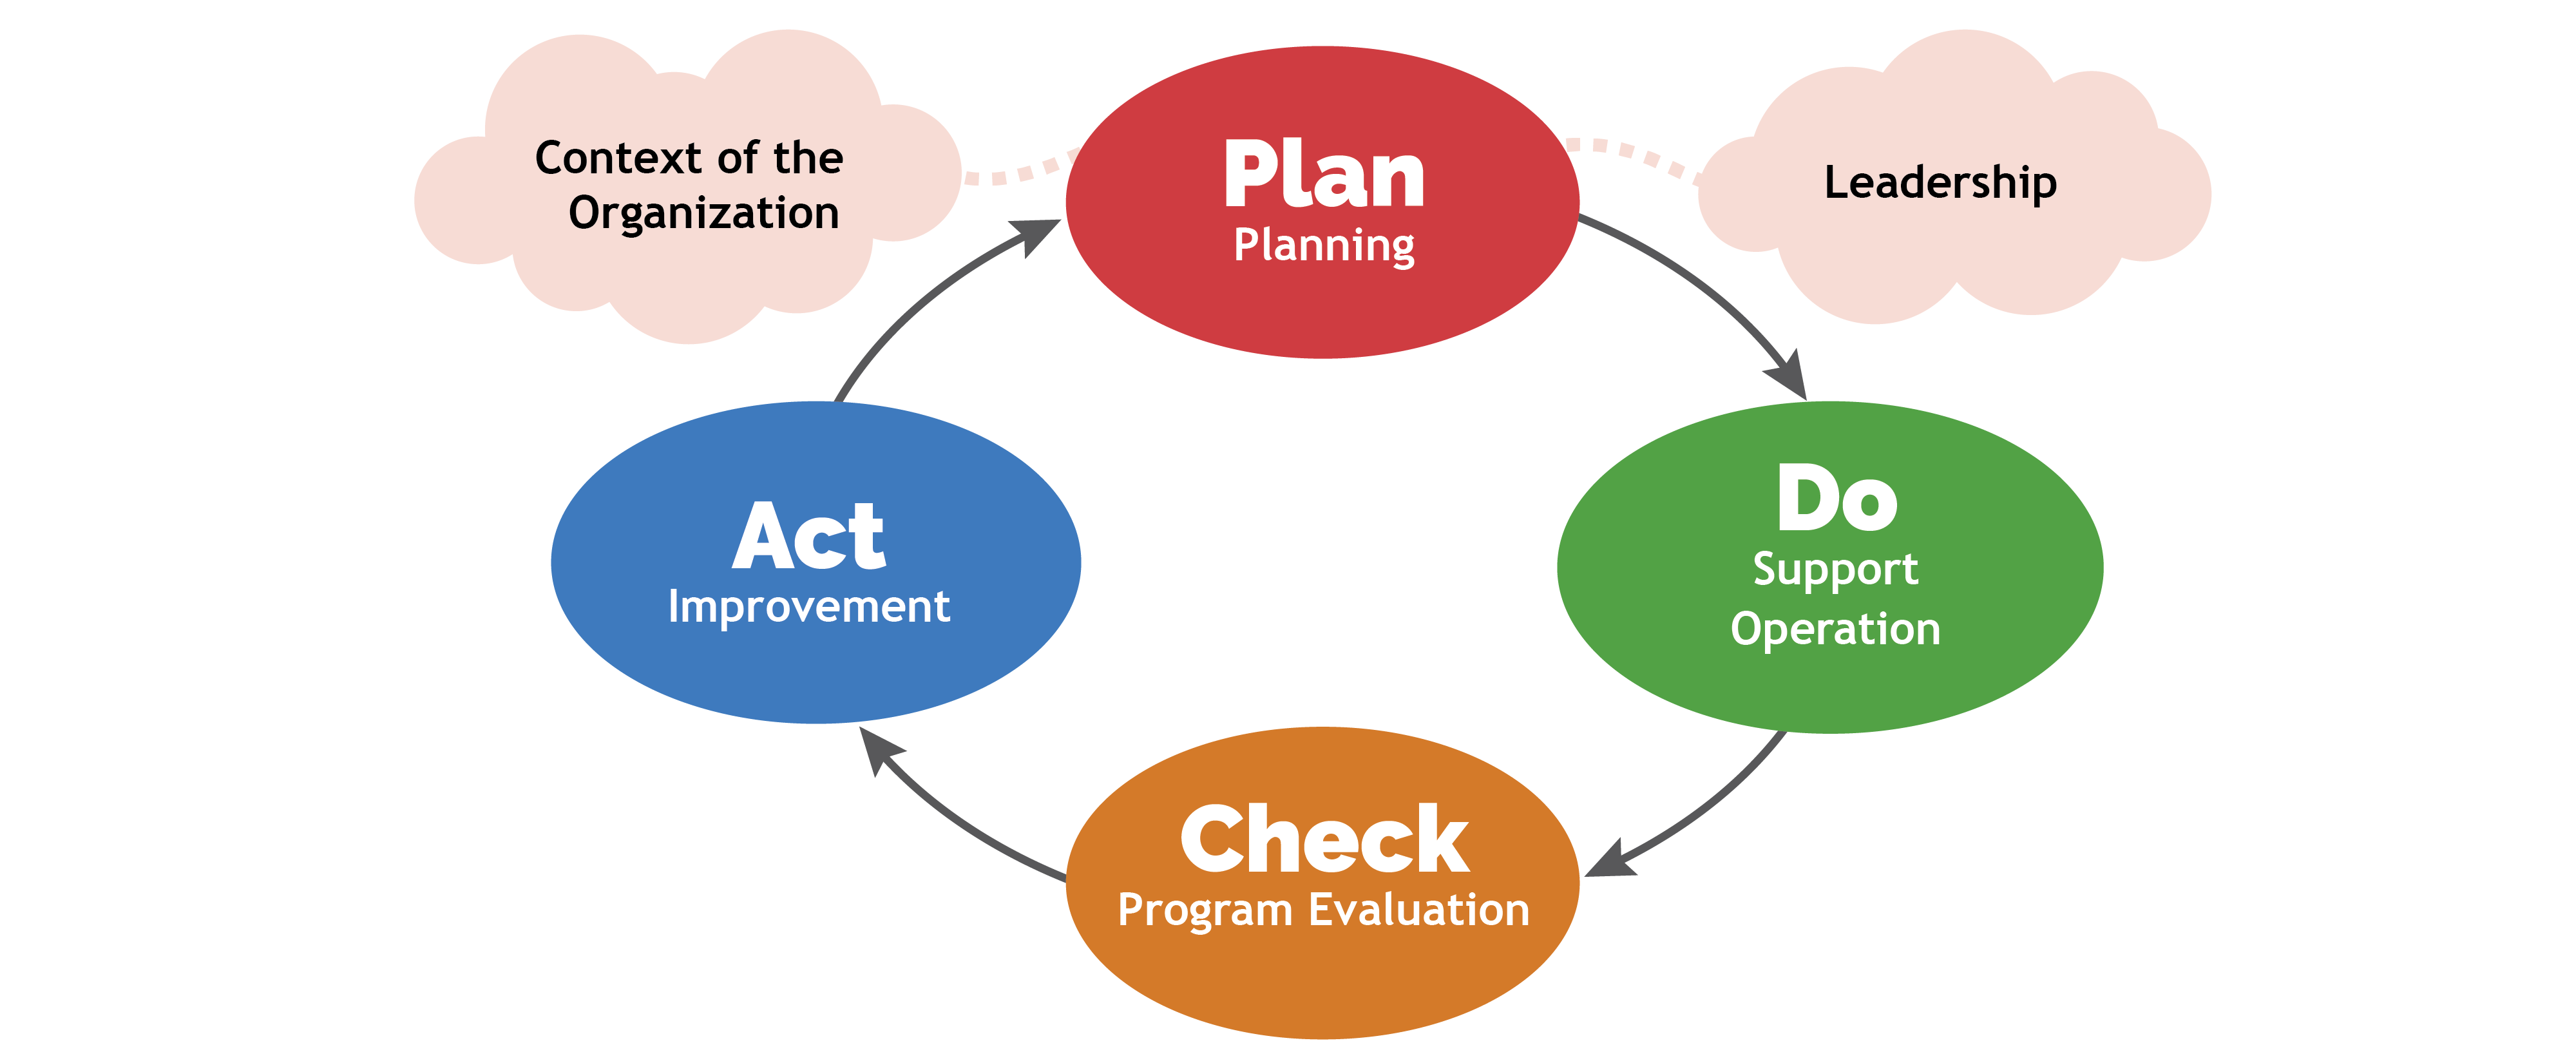 Plan, Do, Check, Act circular image - steps for developing and maintaining an EMS